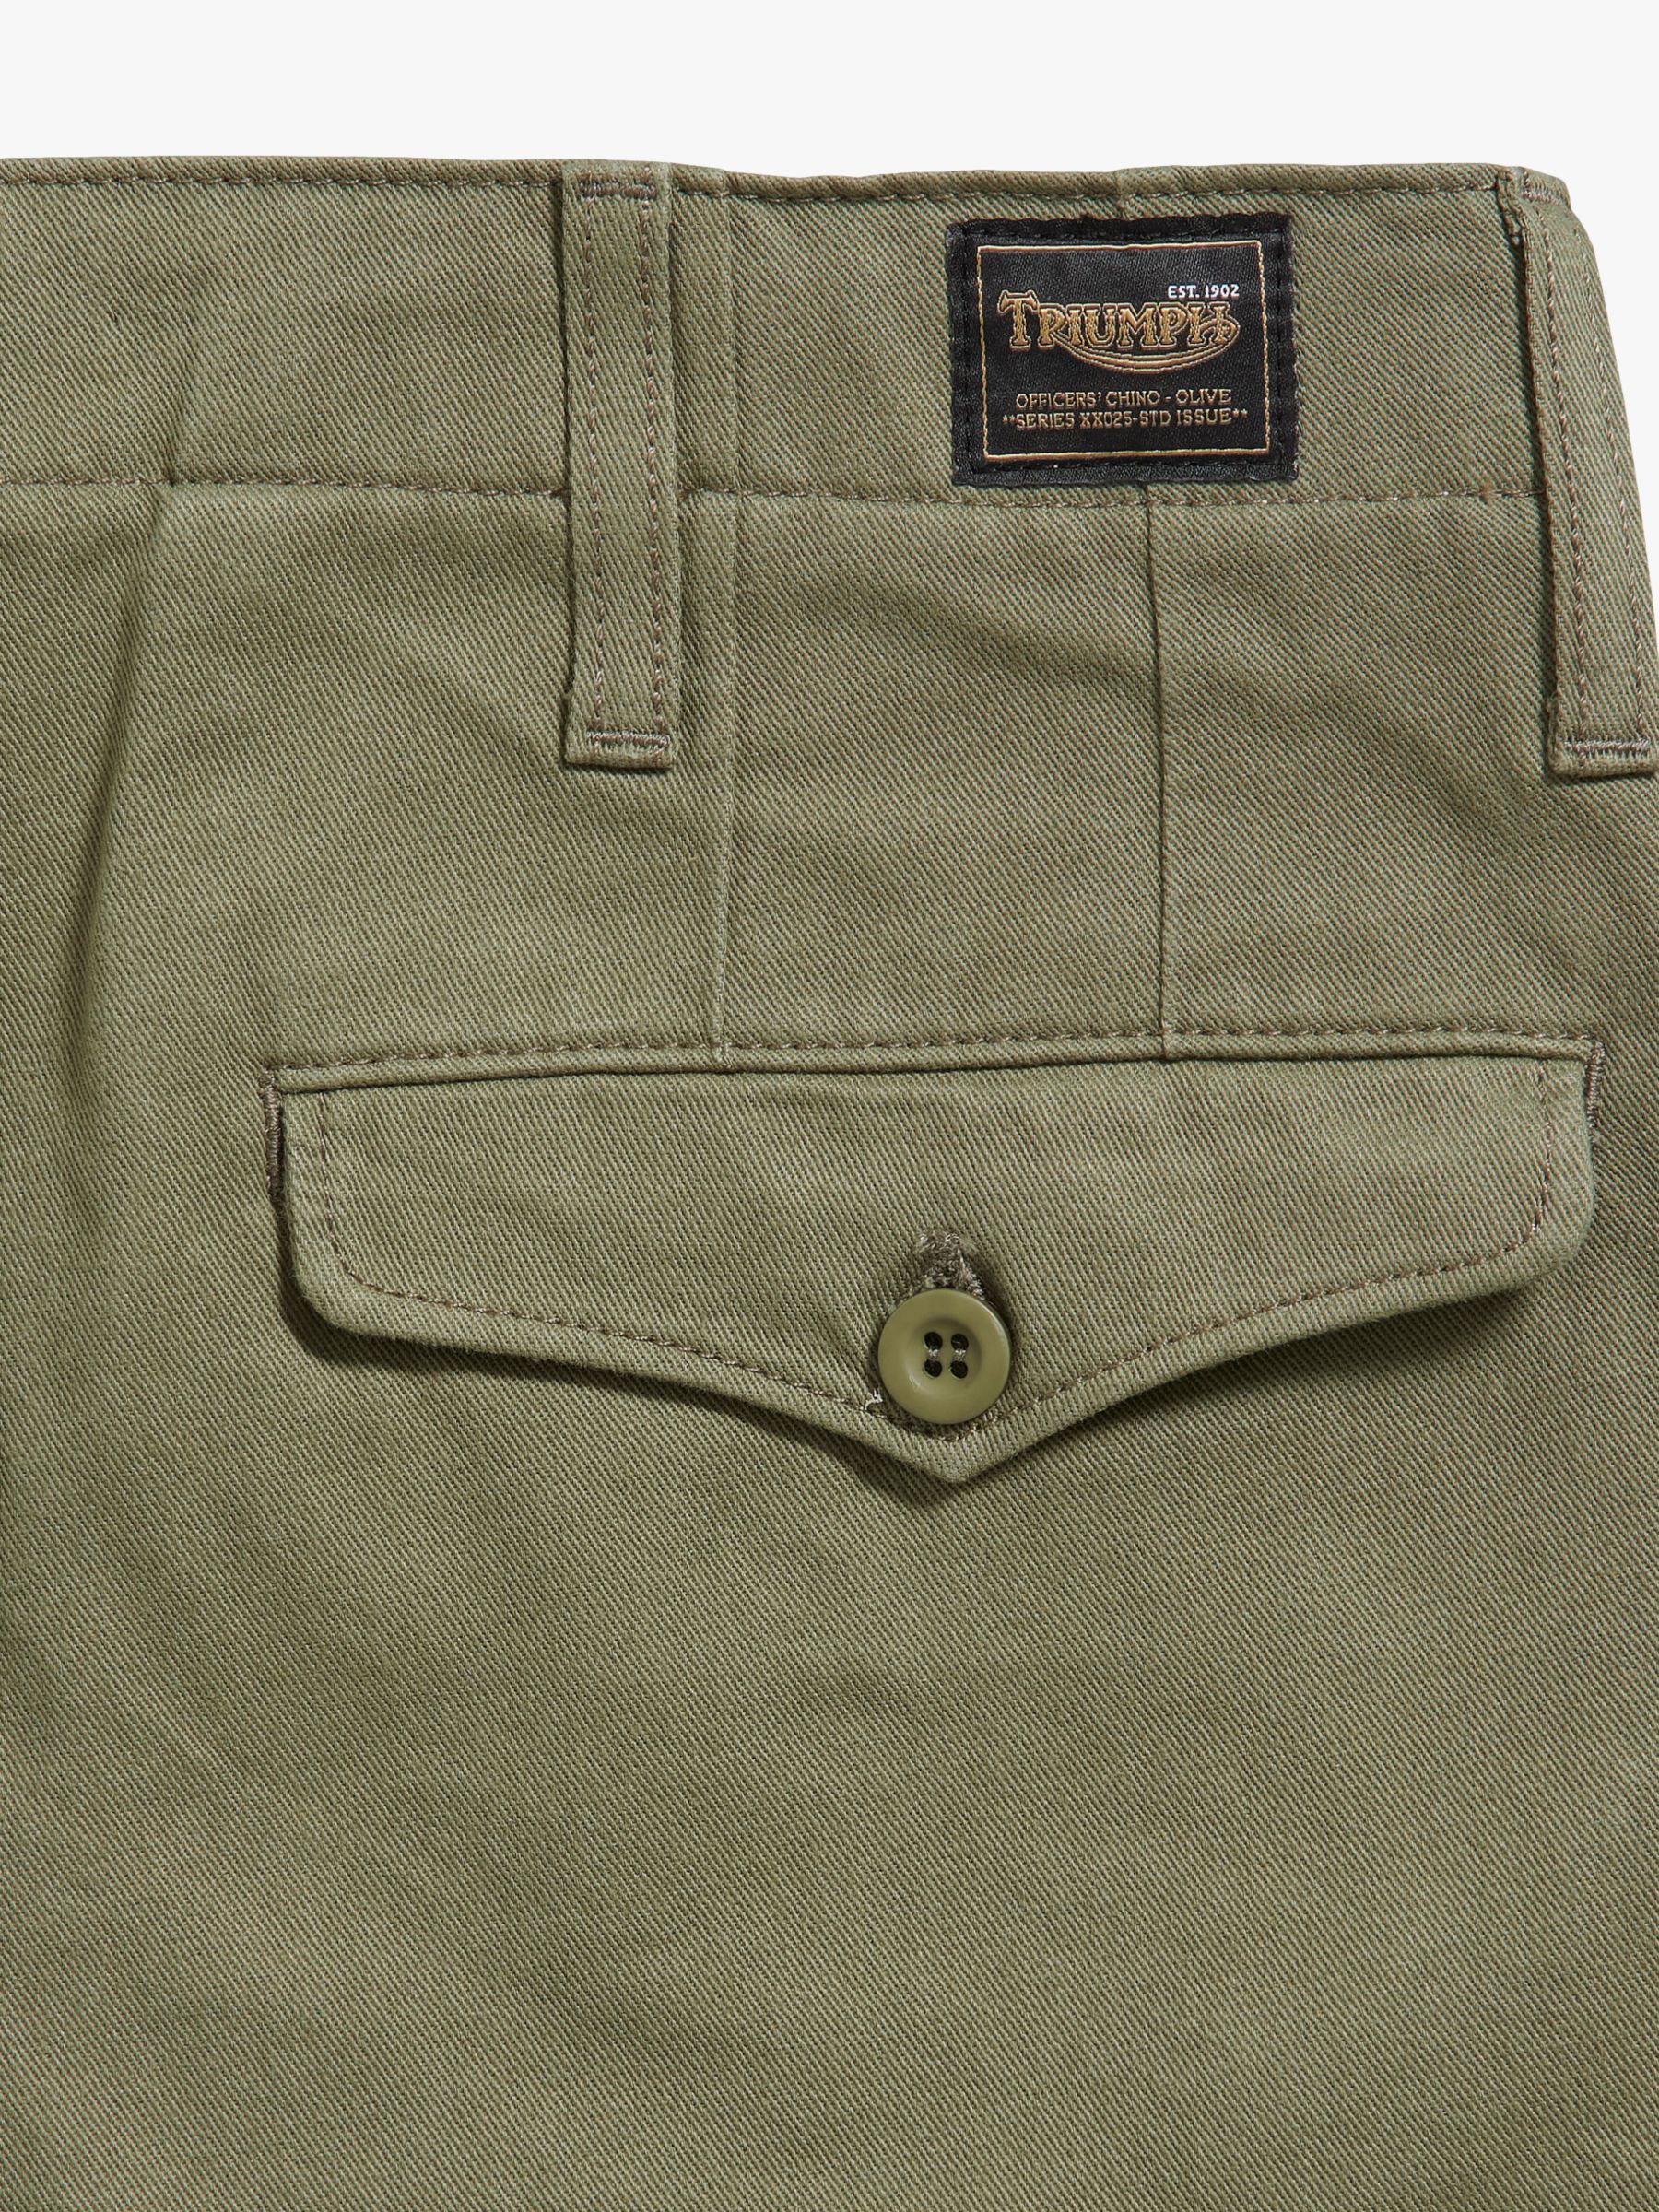 Buy Triumph Motorcycles Officer Chinos, Olive Online at johnlewis.com